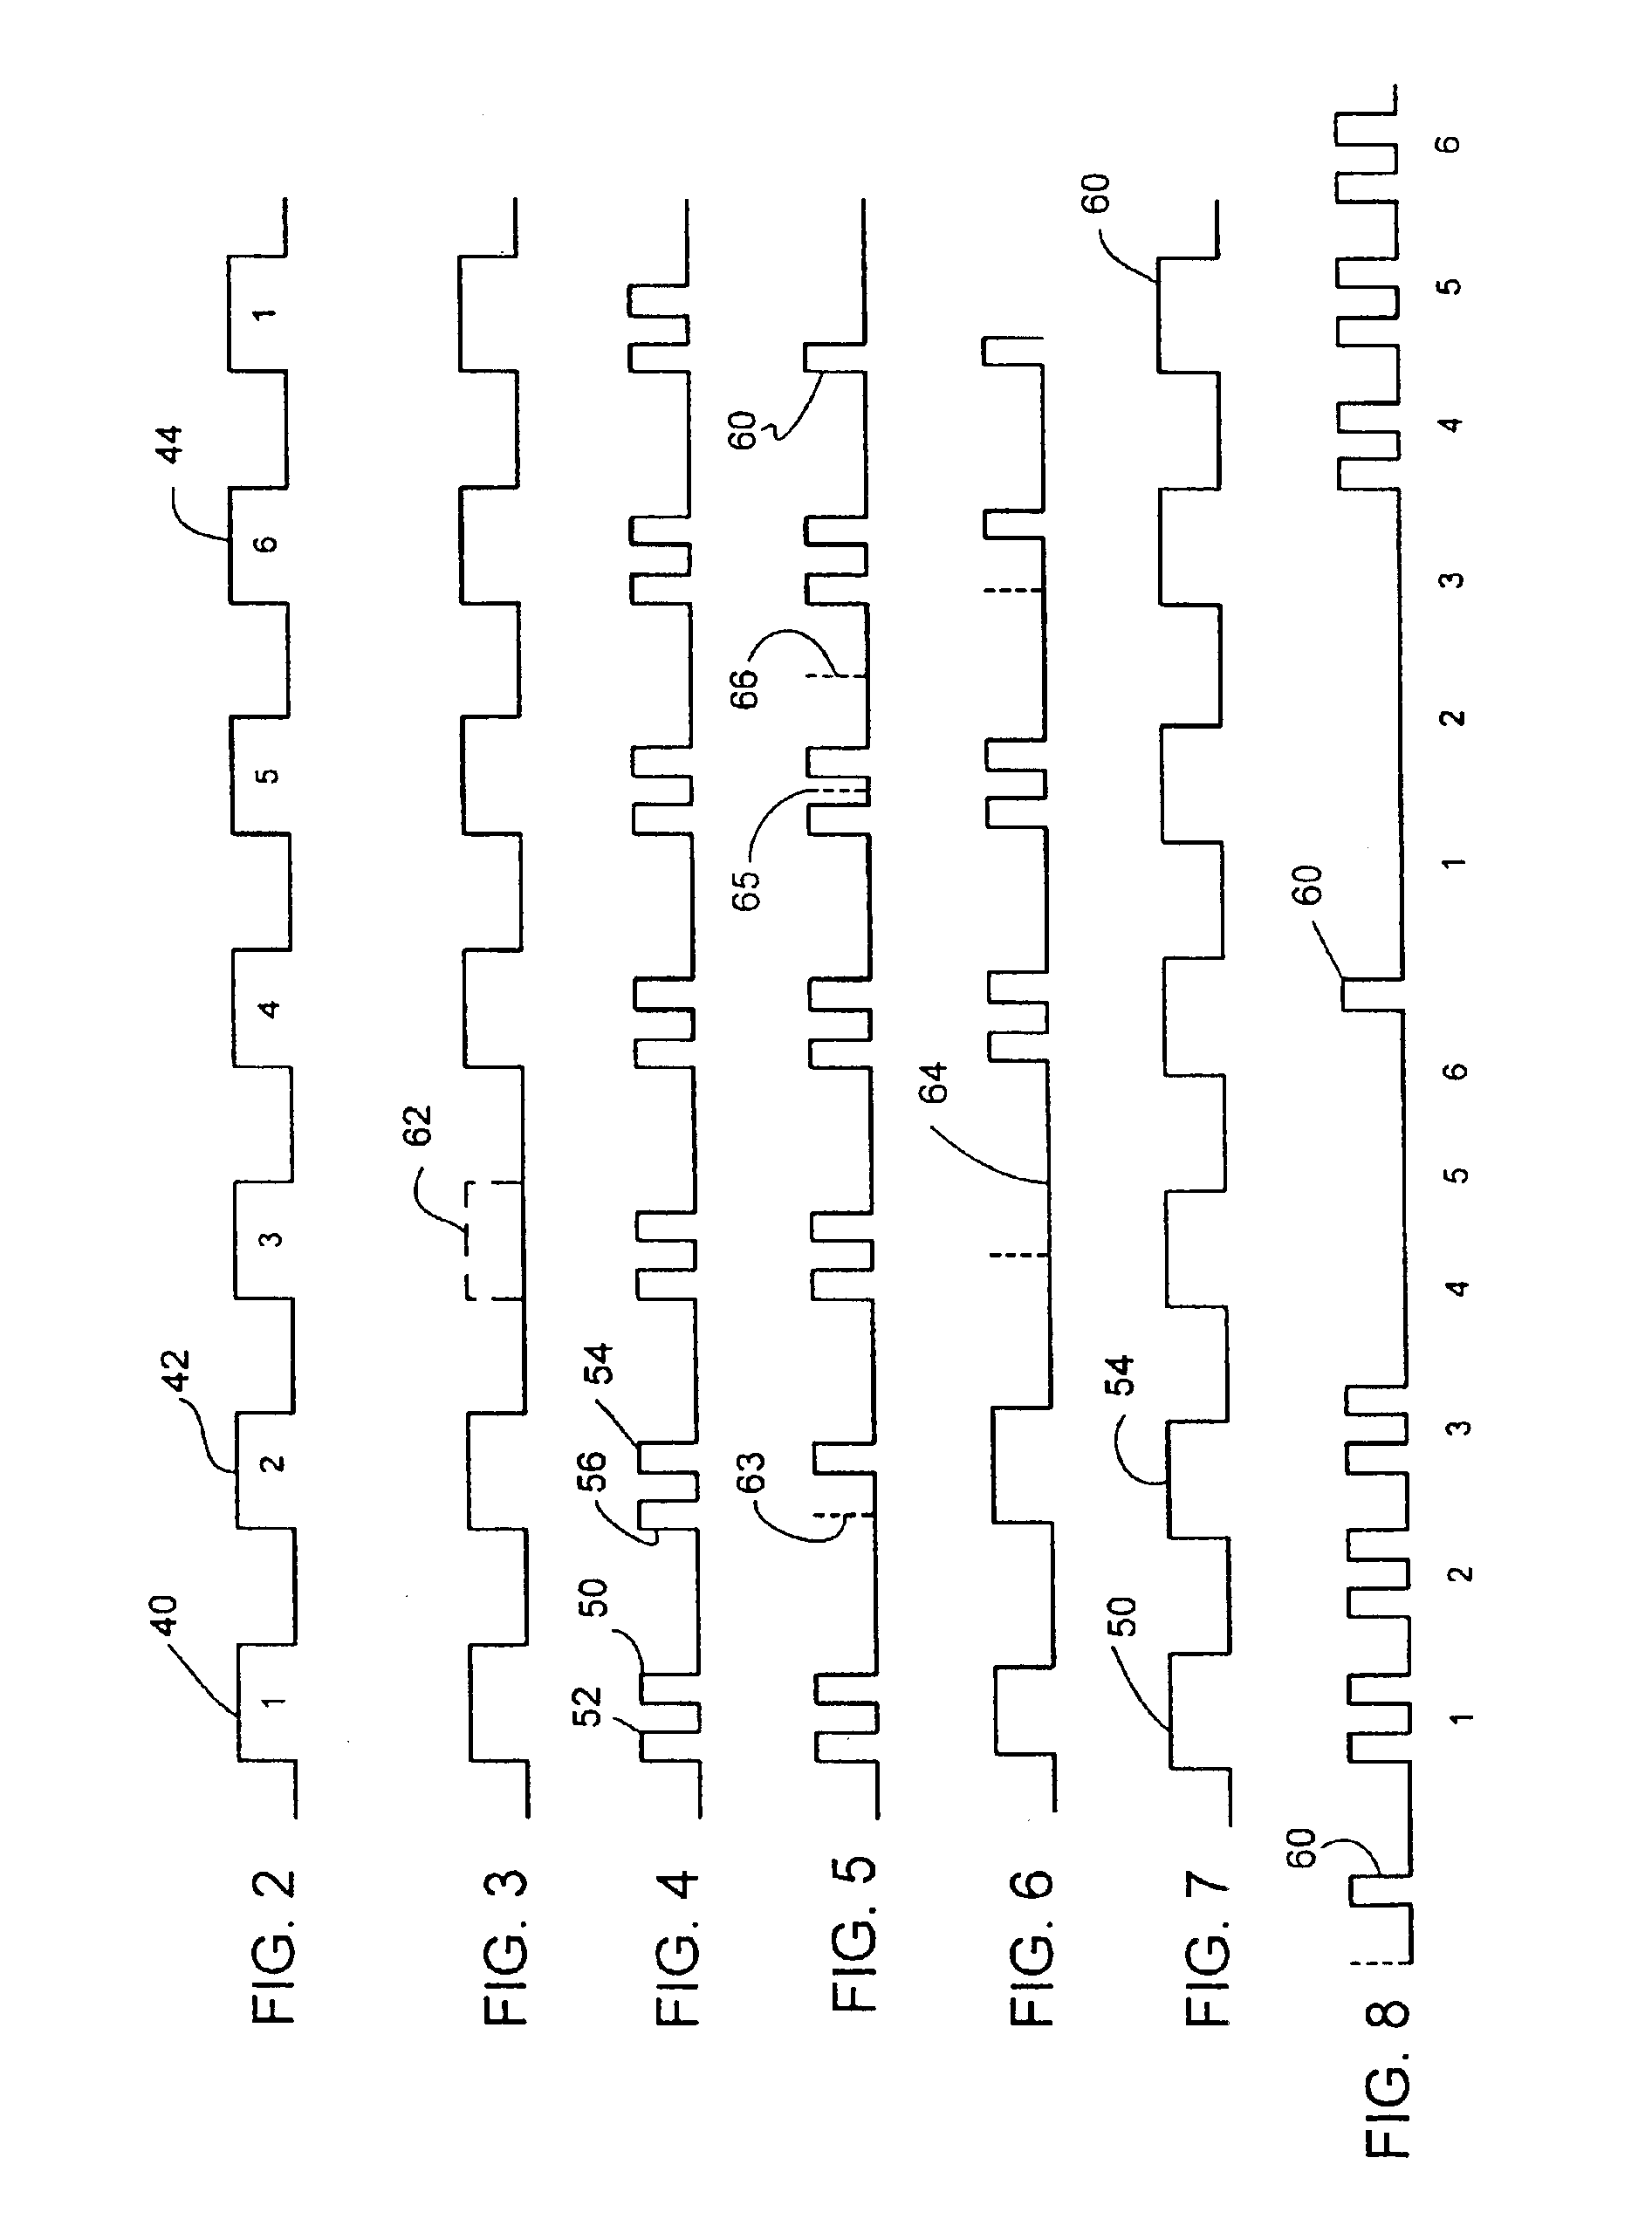 Monitoring and control for power electronic system